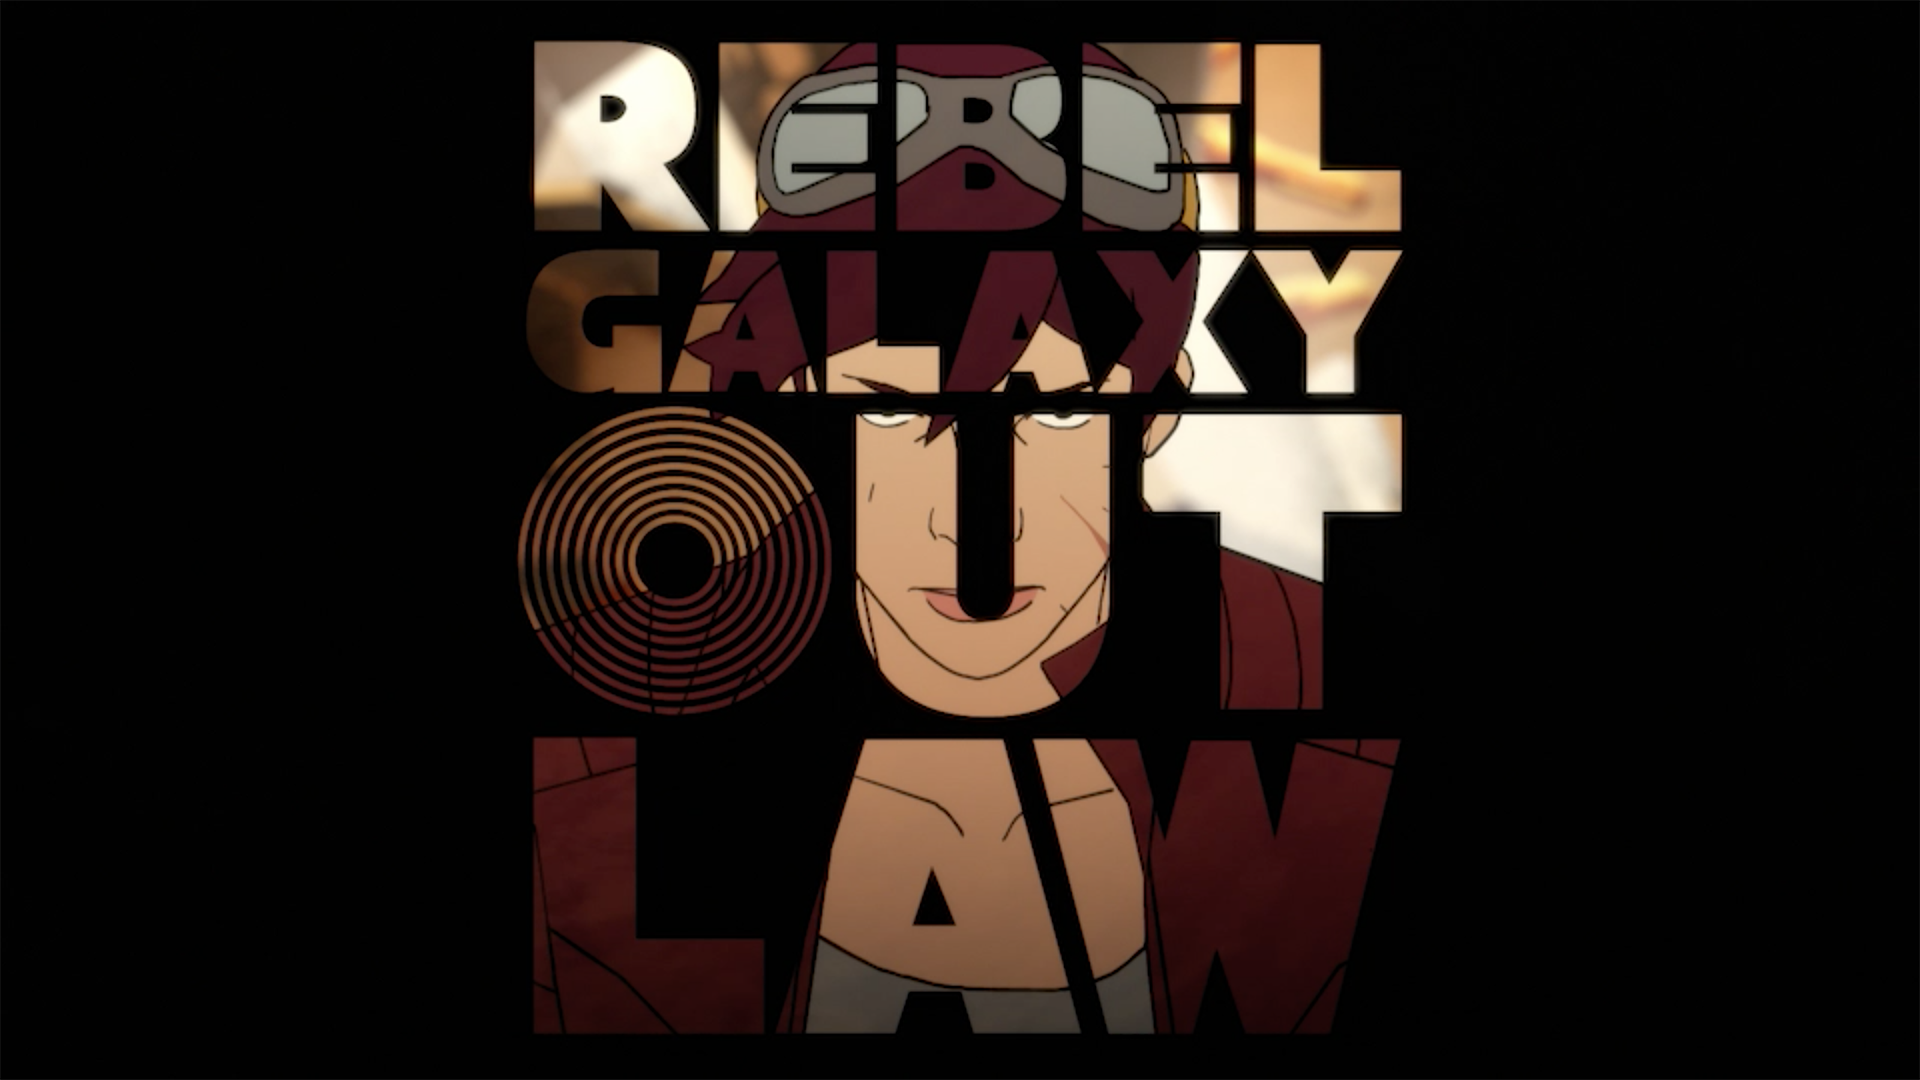 Rebel Galaxy Outlaw - Illustration , HD Wallpaper & Backgrounds